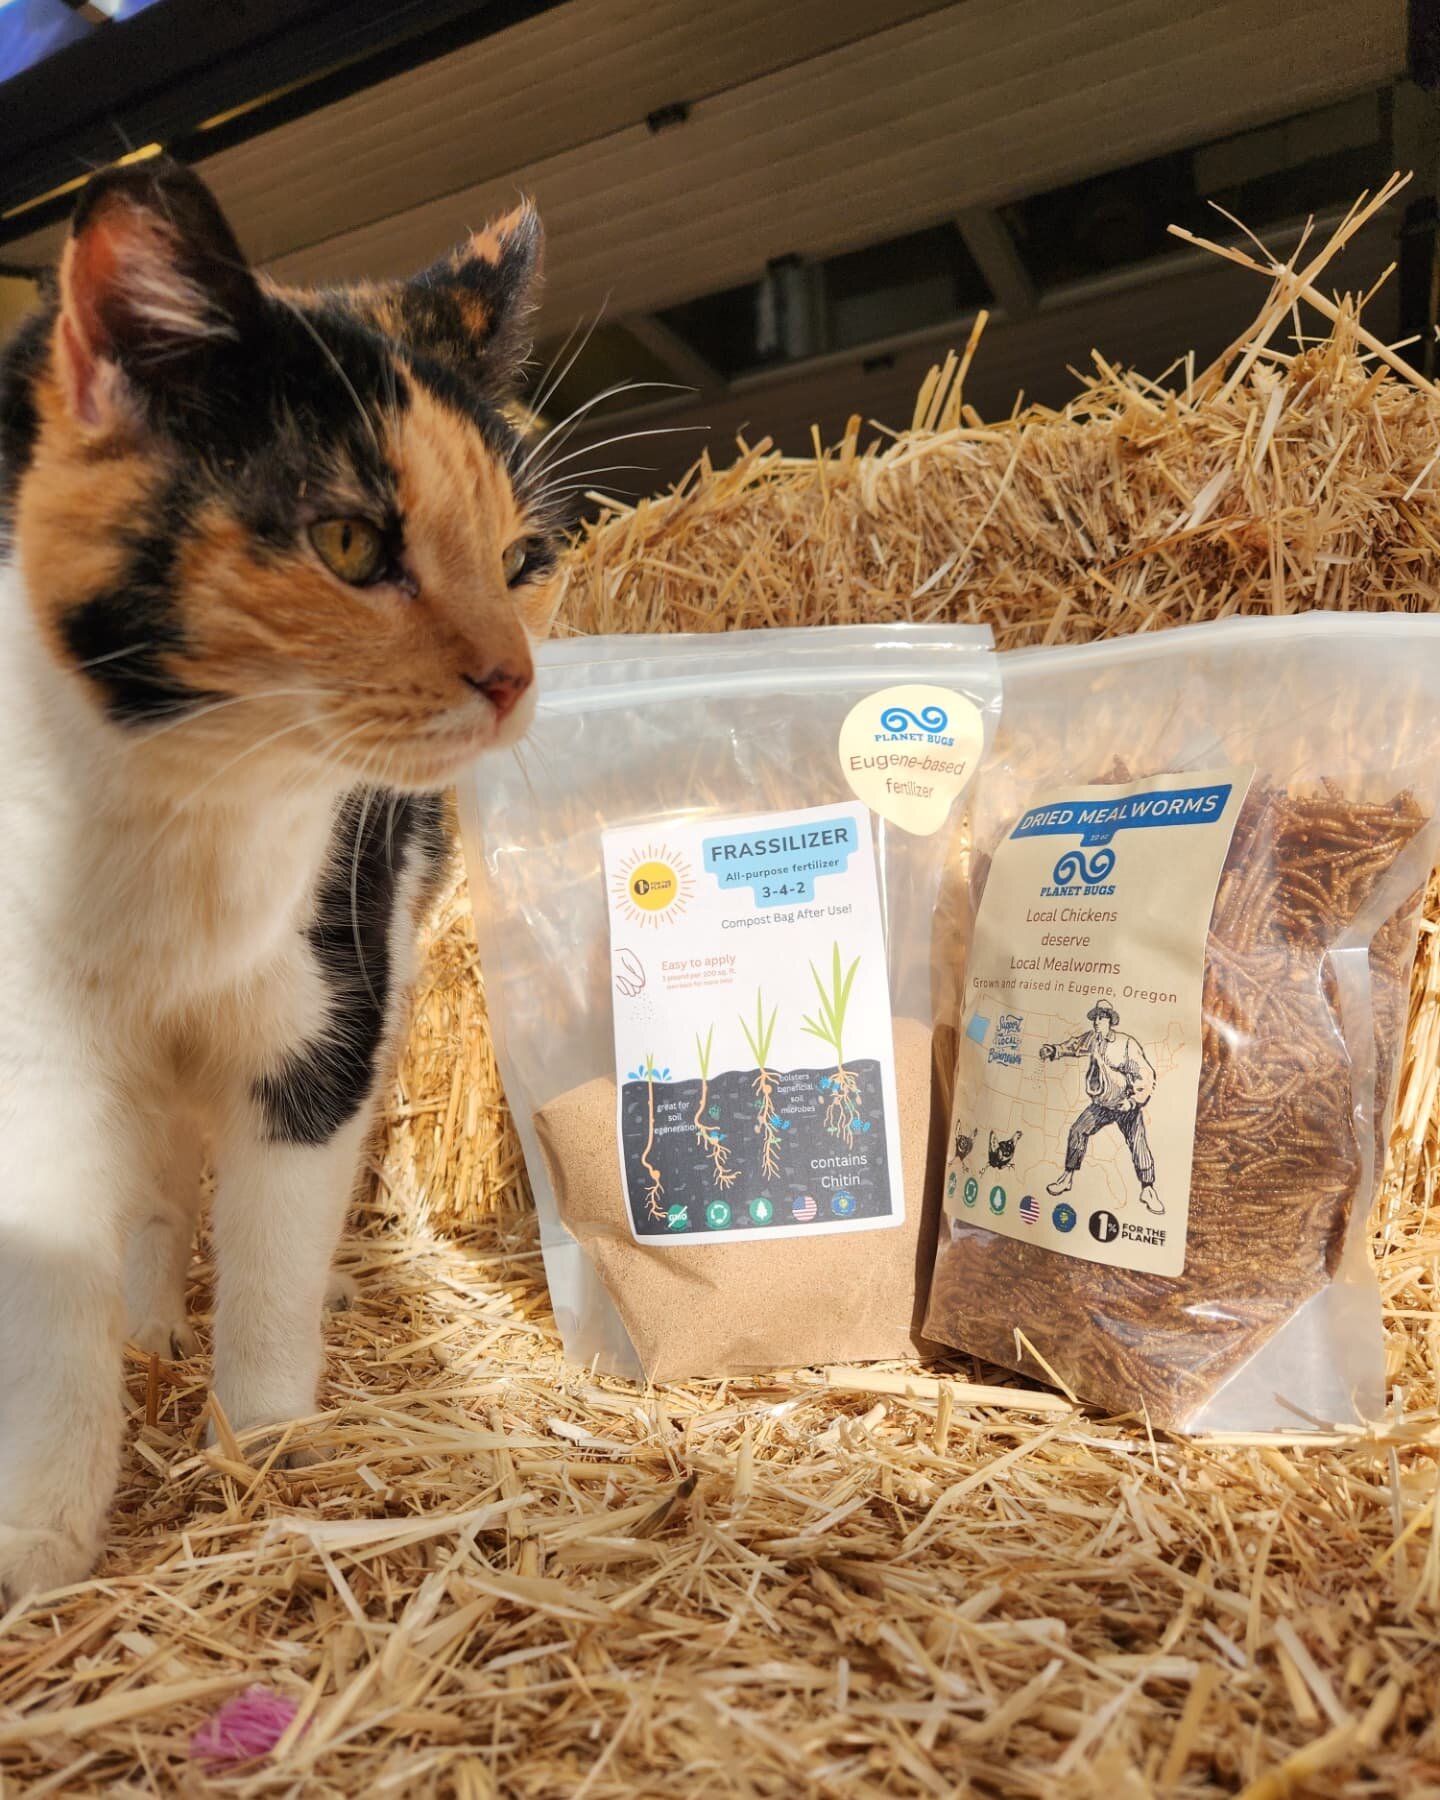 We have two exciting new local products from Planet Bugs! Chicken approved dried mealworms and Frassilizer, which is an all-purpose plant based fertilizer!